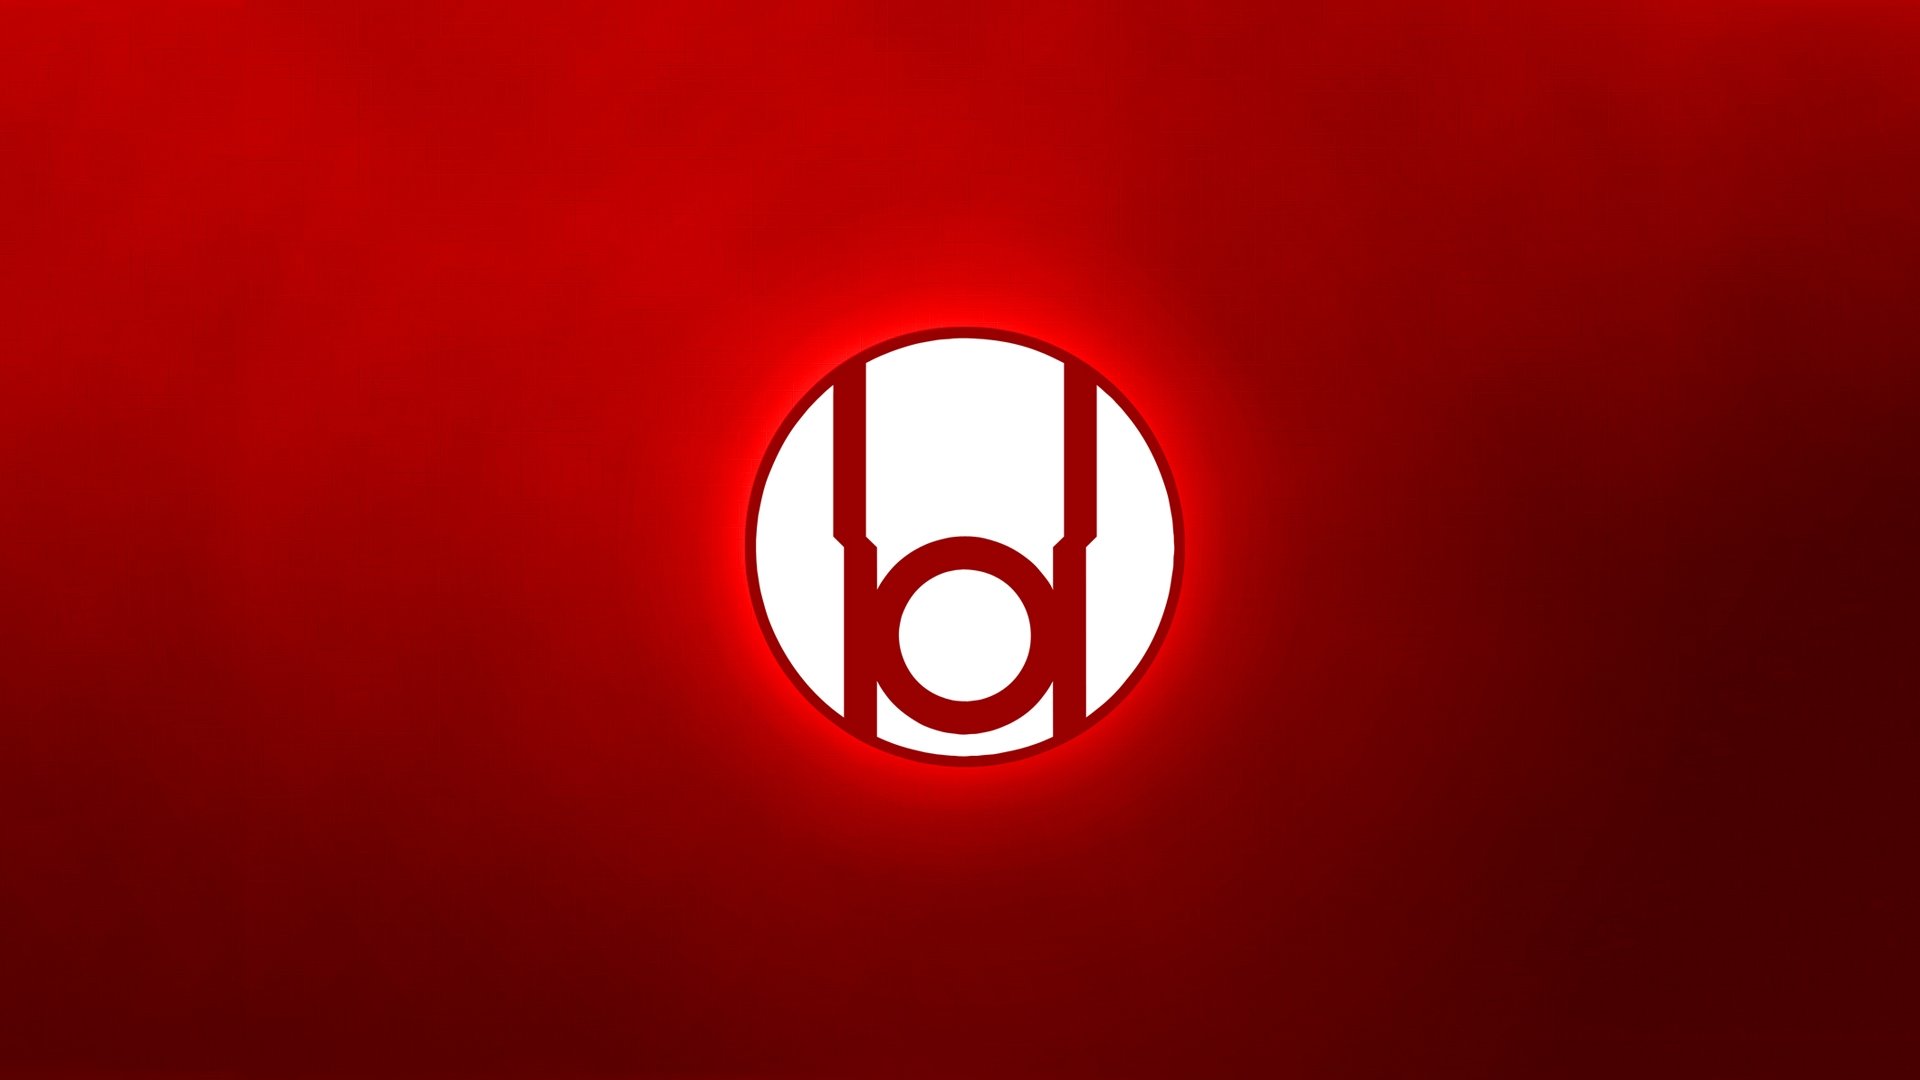 High Resolution Red Lantern Corps Full Hd Background - Red Lantern Corps - HD Wallpaper 